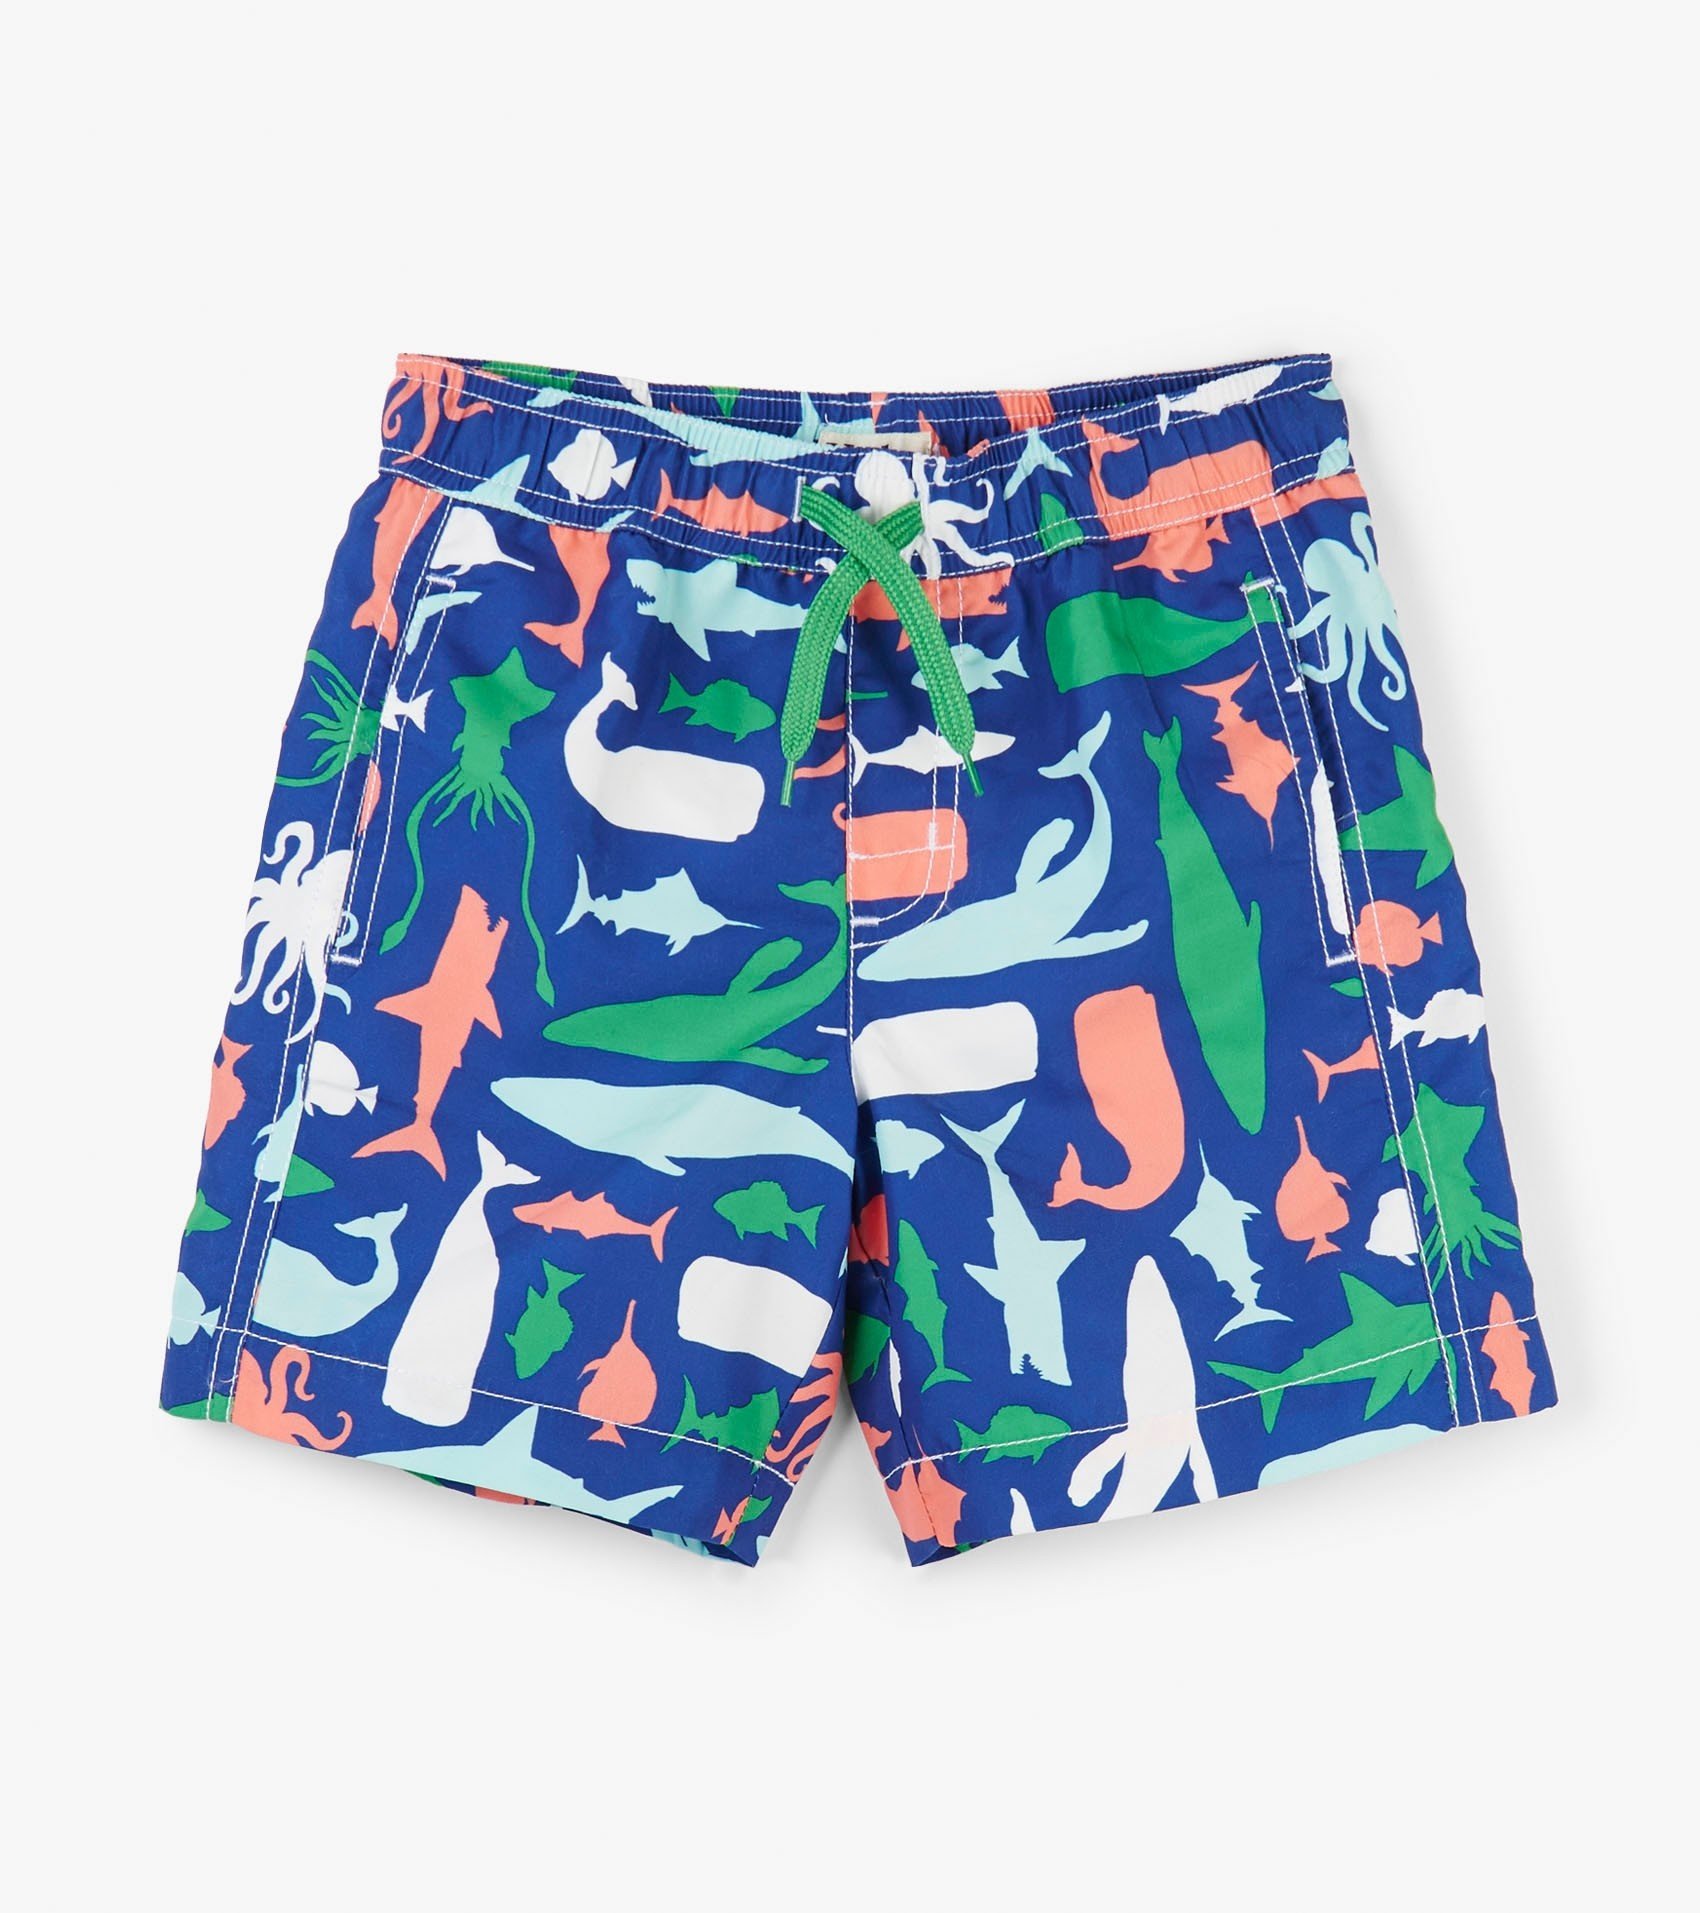 Boys Swim Trunks UPF 50 by Hatley in Victoria BC Canada at Abby